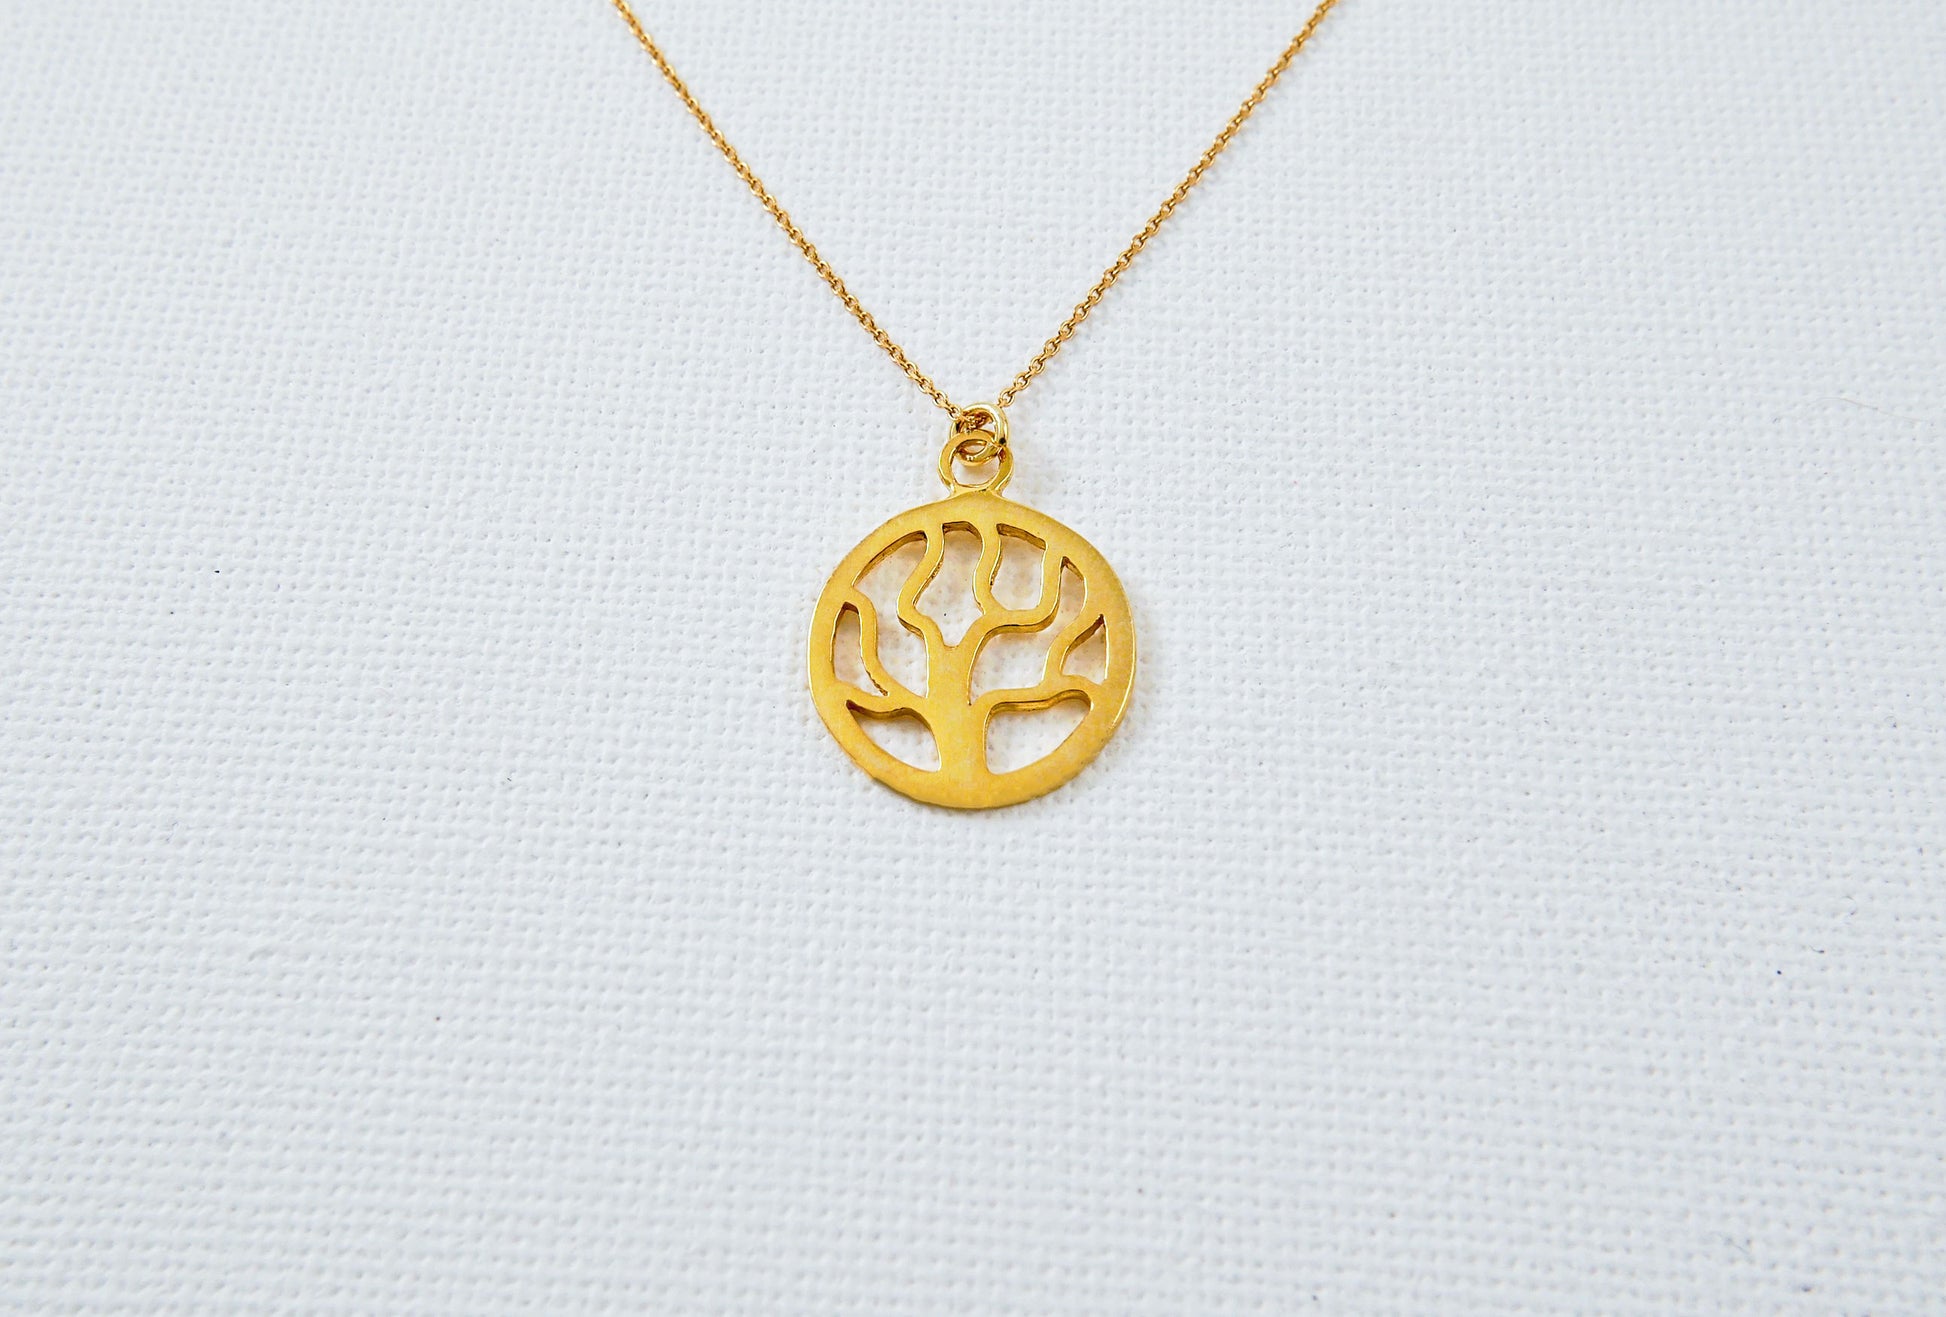 Small round goldplated silver necklace with a tree